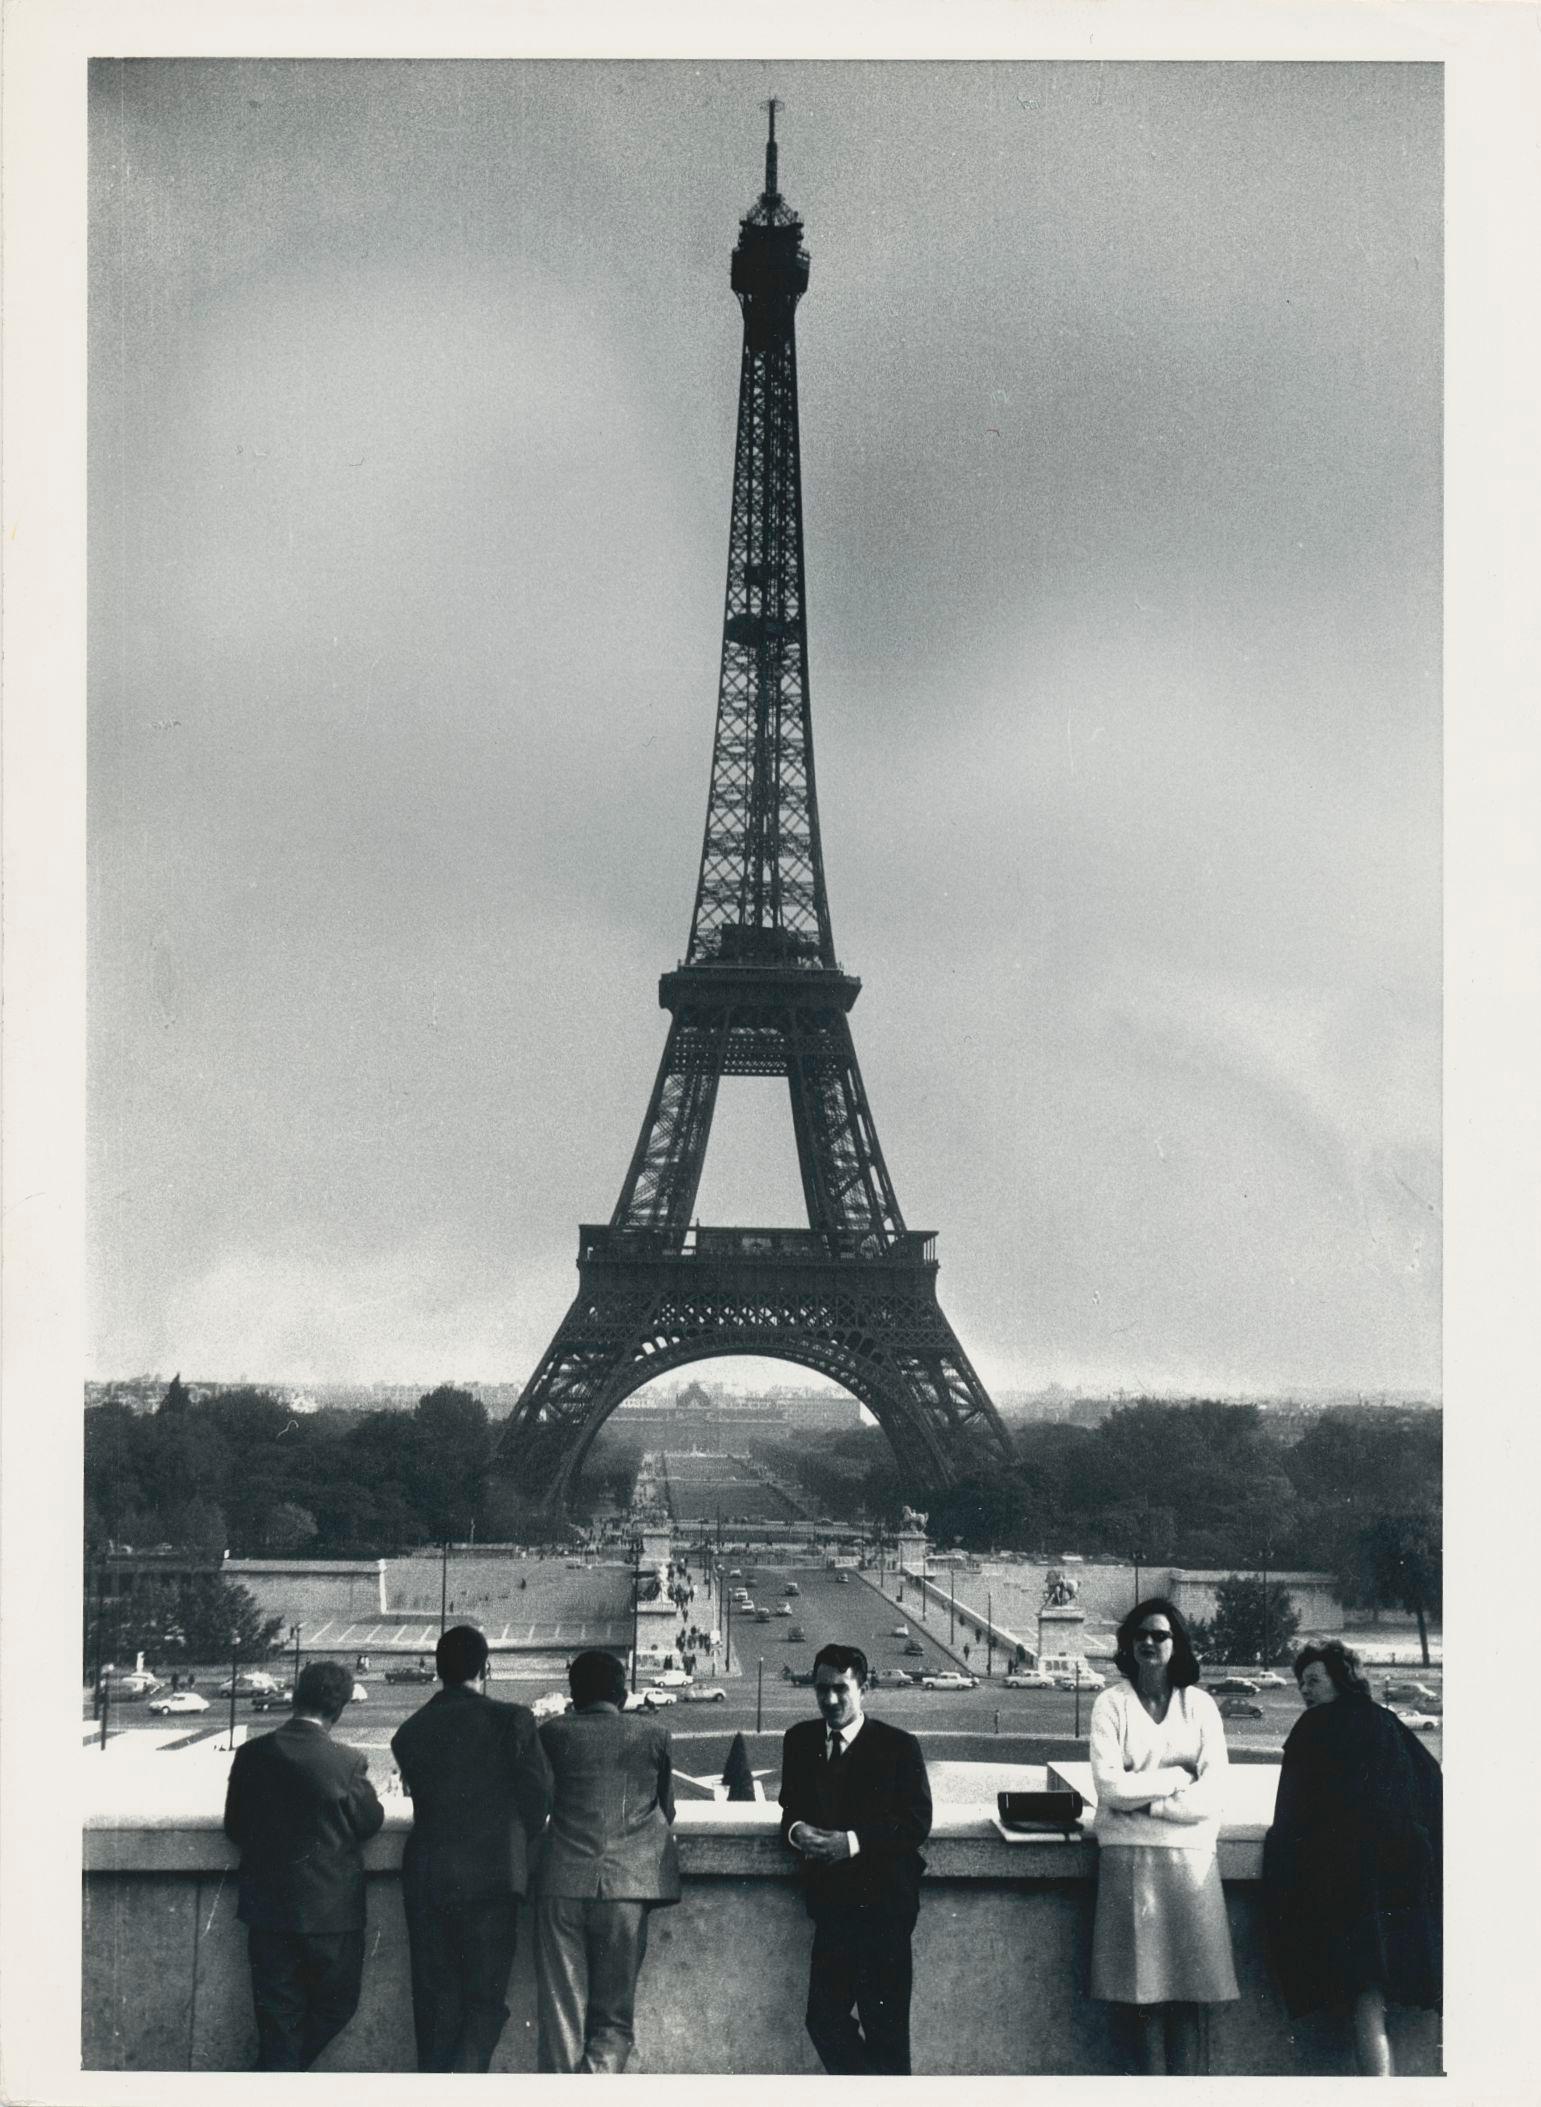 Eiffel Tower, Street Photography, Black and White, France 1950s, 17, 8 x 13, 1 cm